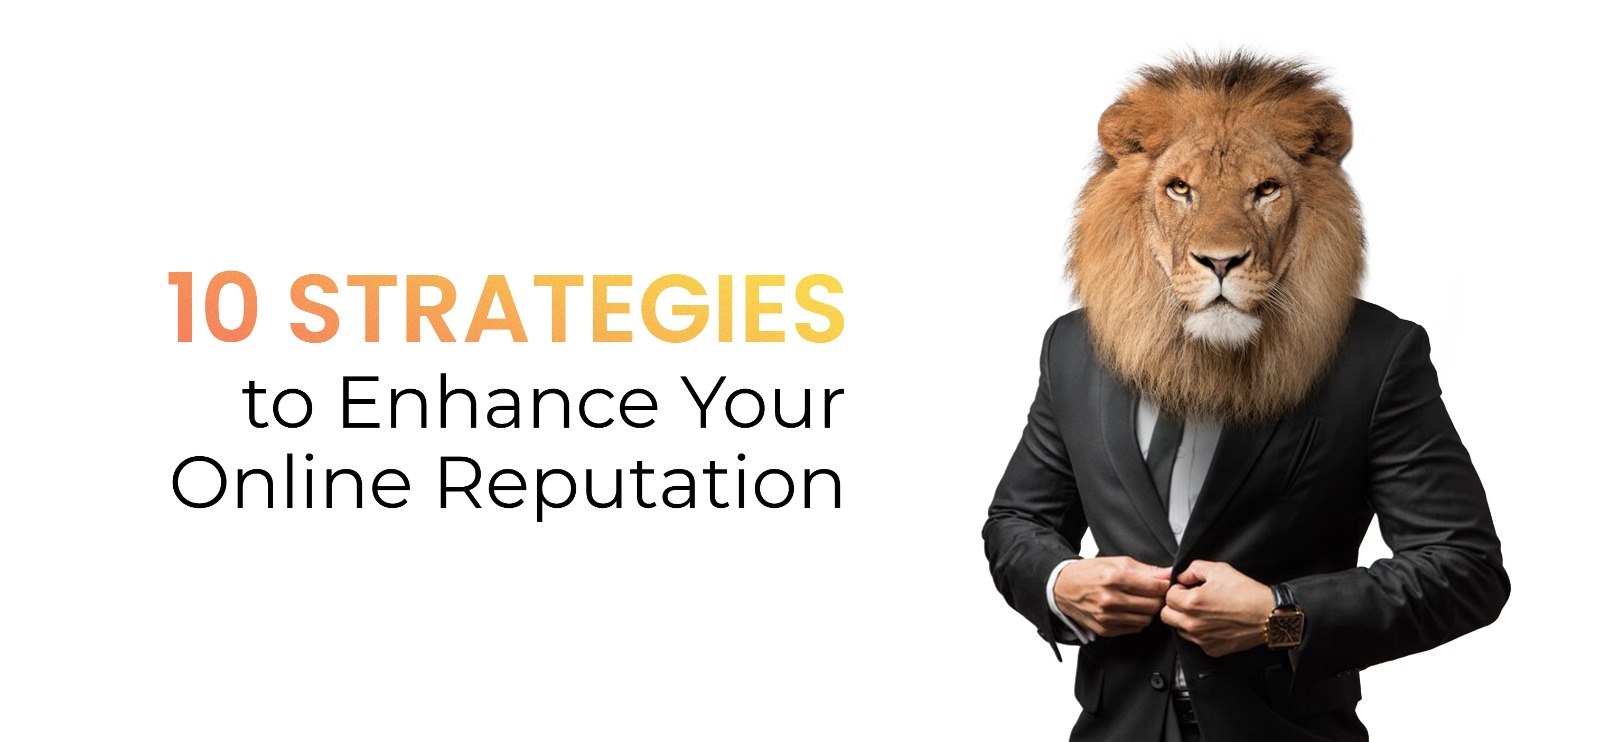 10 Strategies to Enhance Your Online Reputation